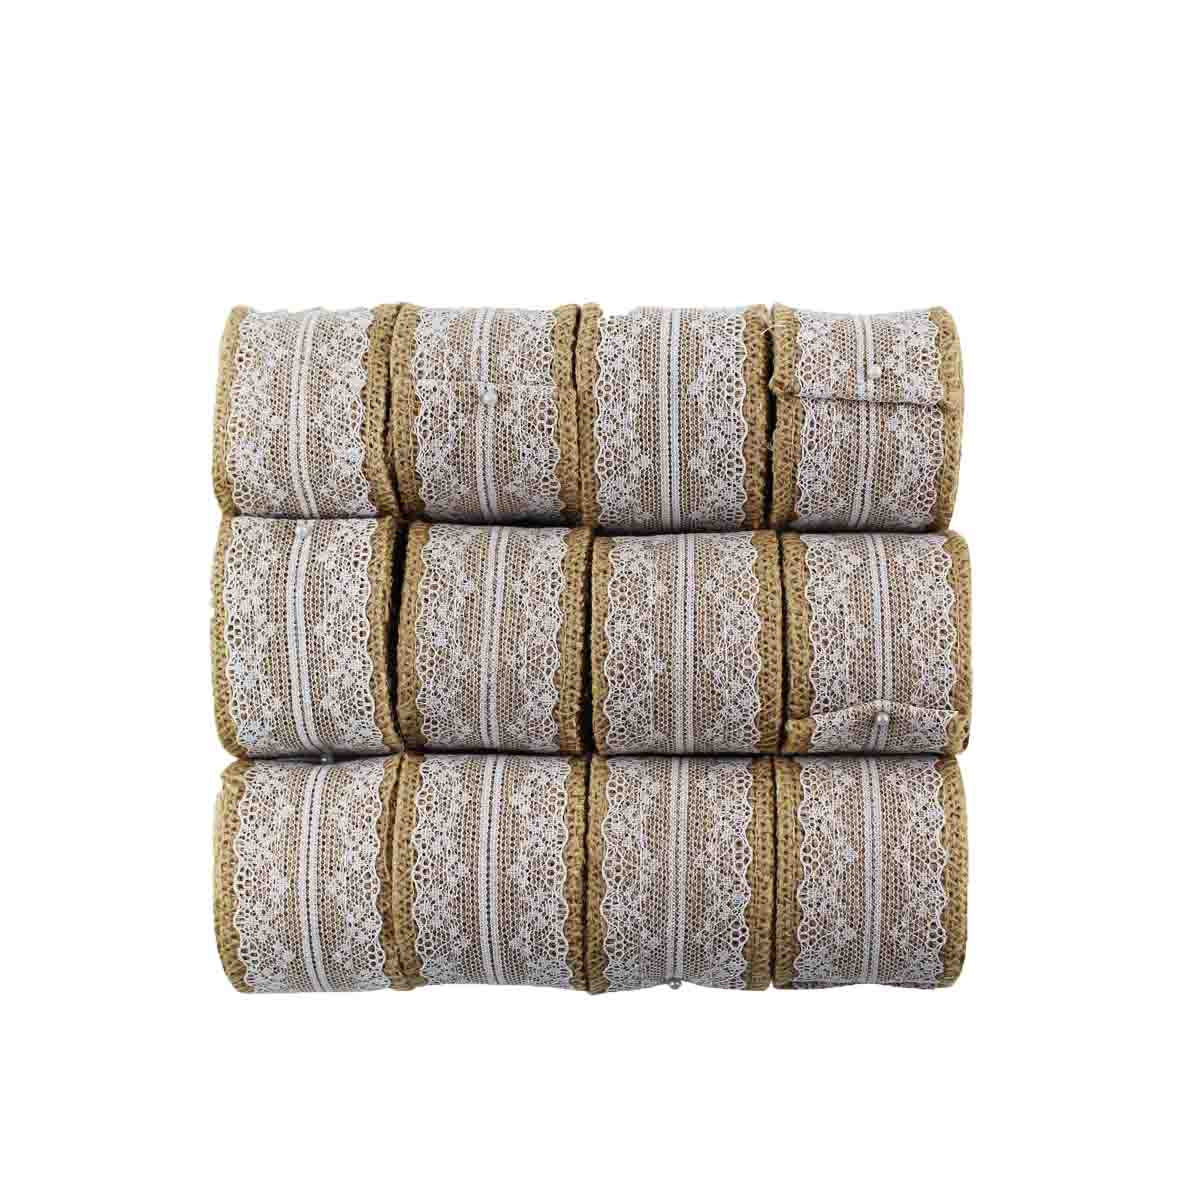 Shop Crafts Natural Thread Rolls -Tailoring Items online in Abu Dhabi, UAE